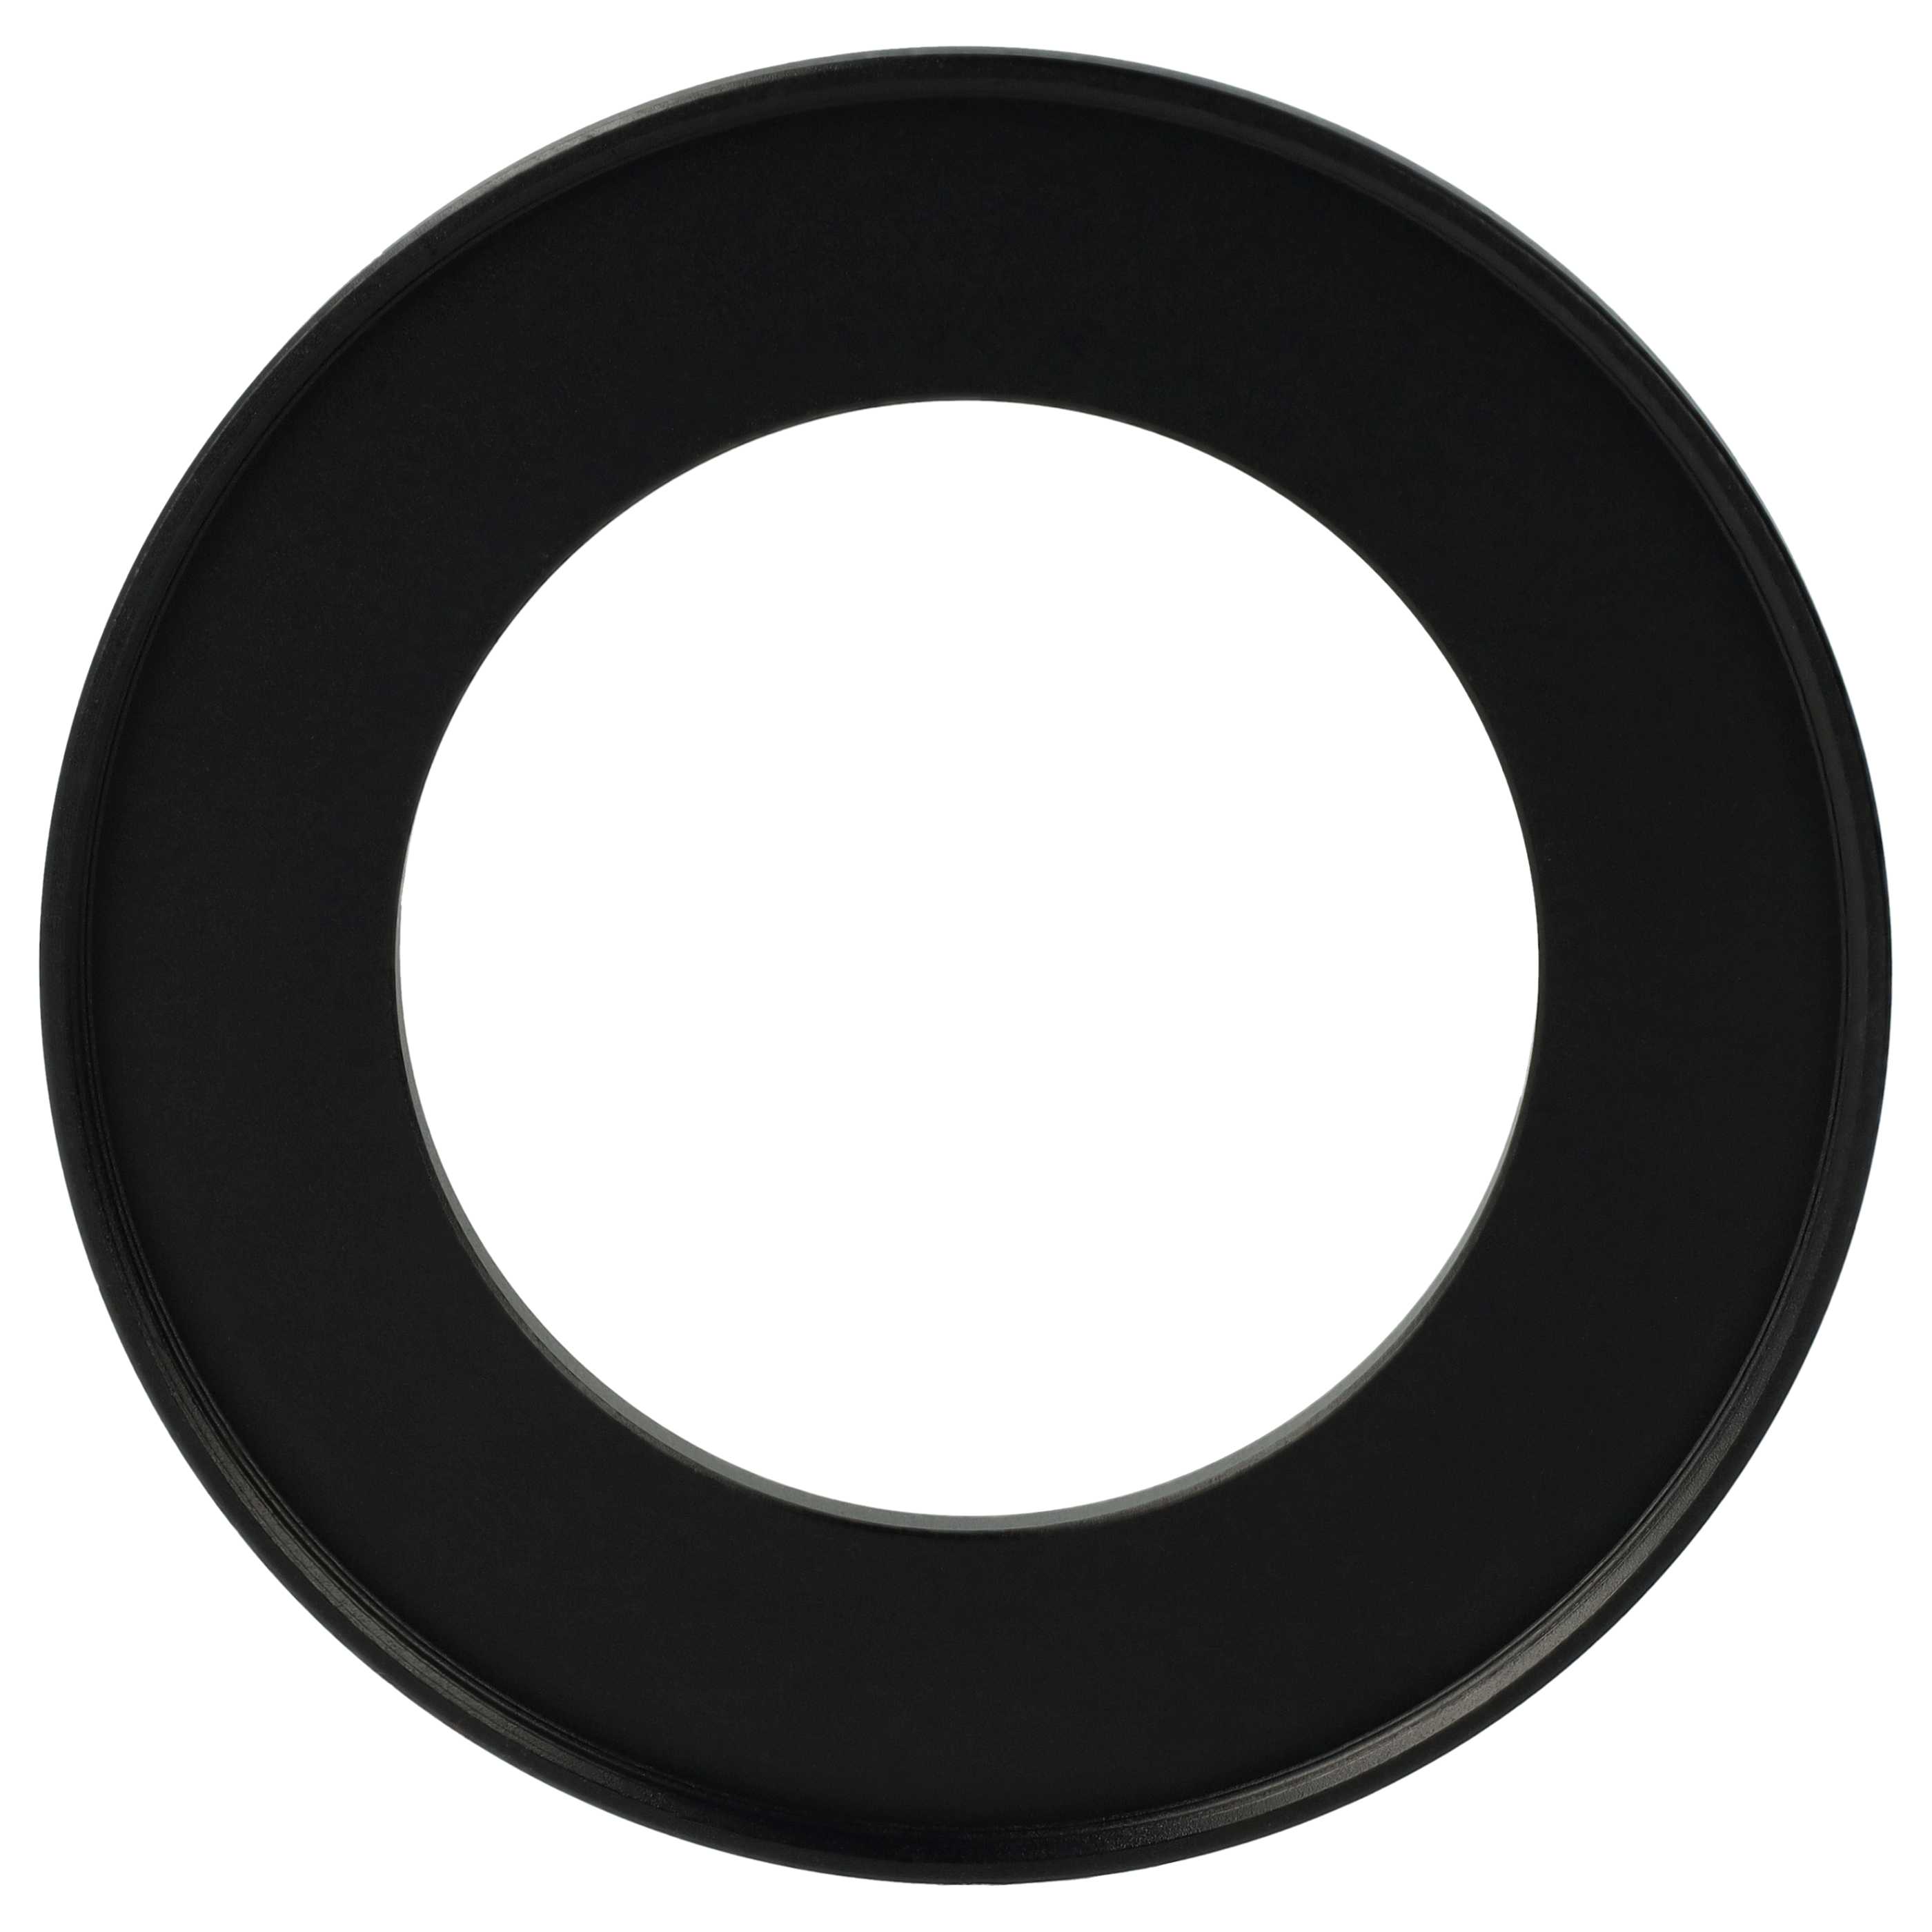 Step-Up Ring Adapter of 49 mm to 72 mmfor various Camera Lens - Filter Adapter